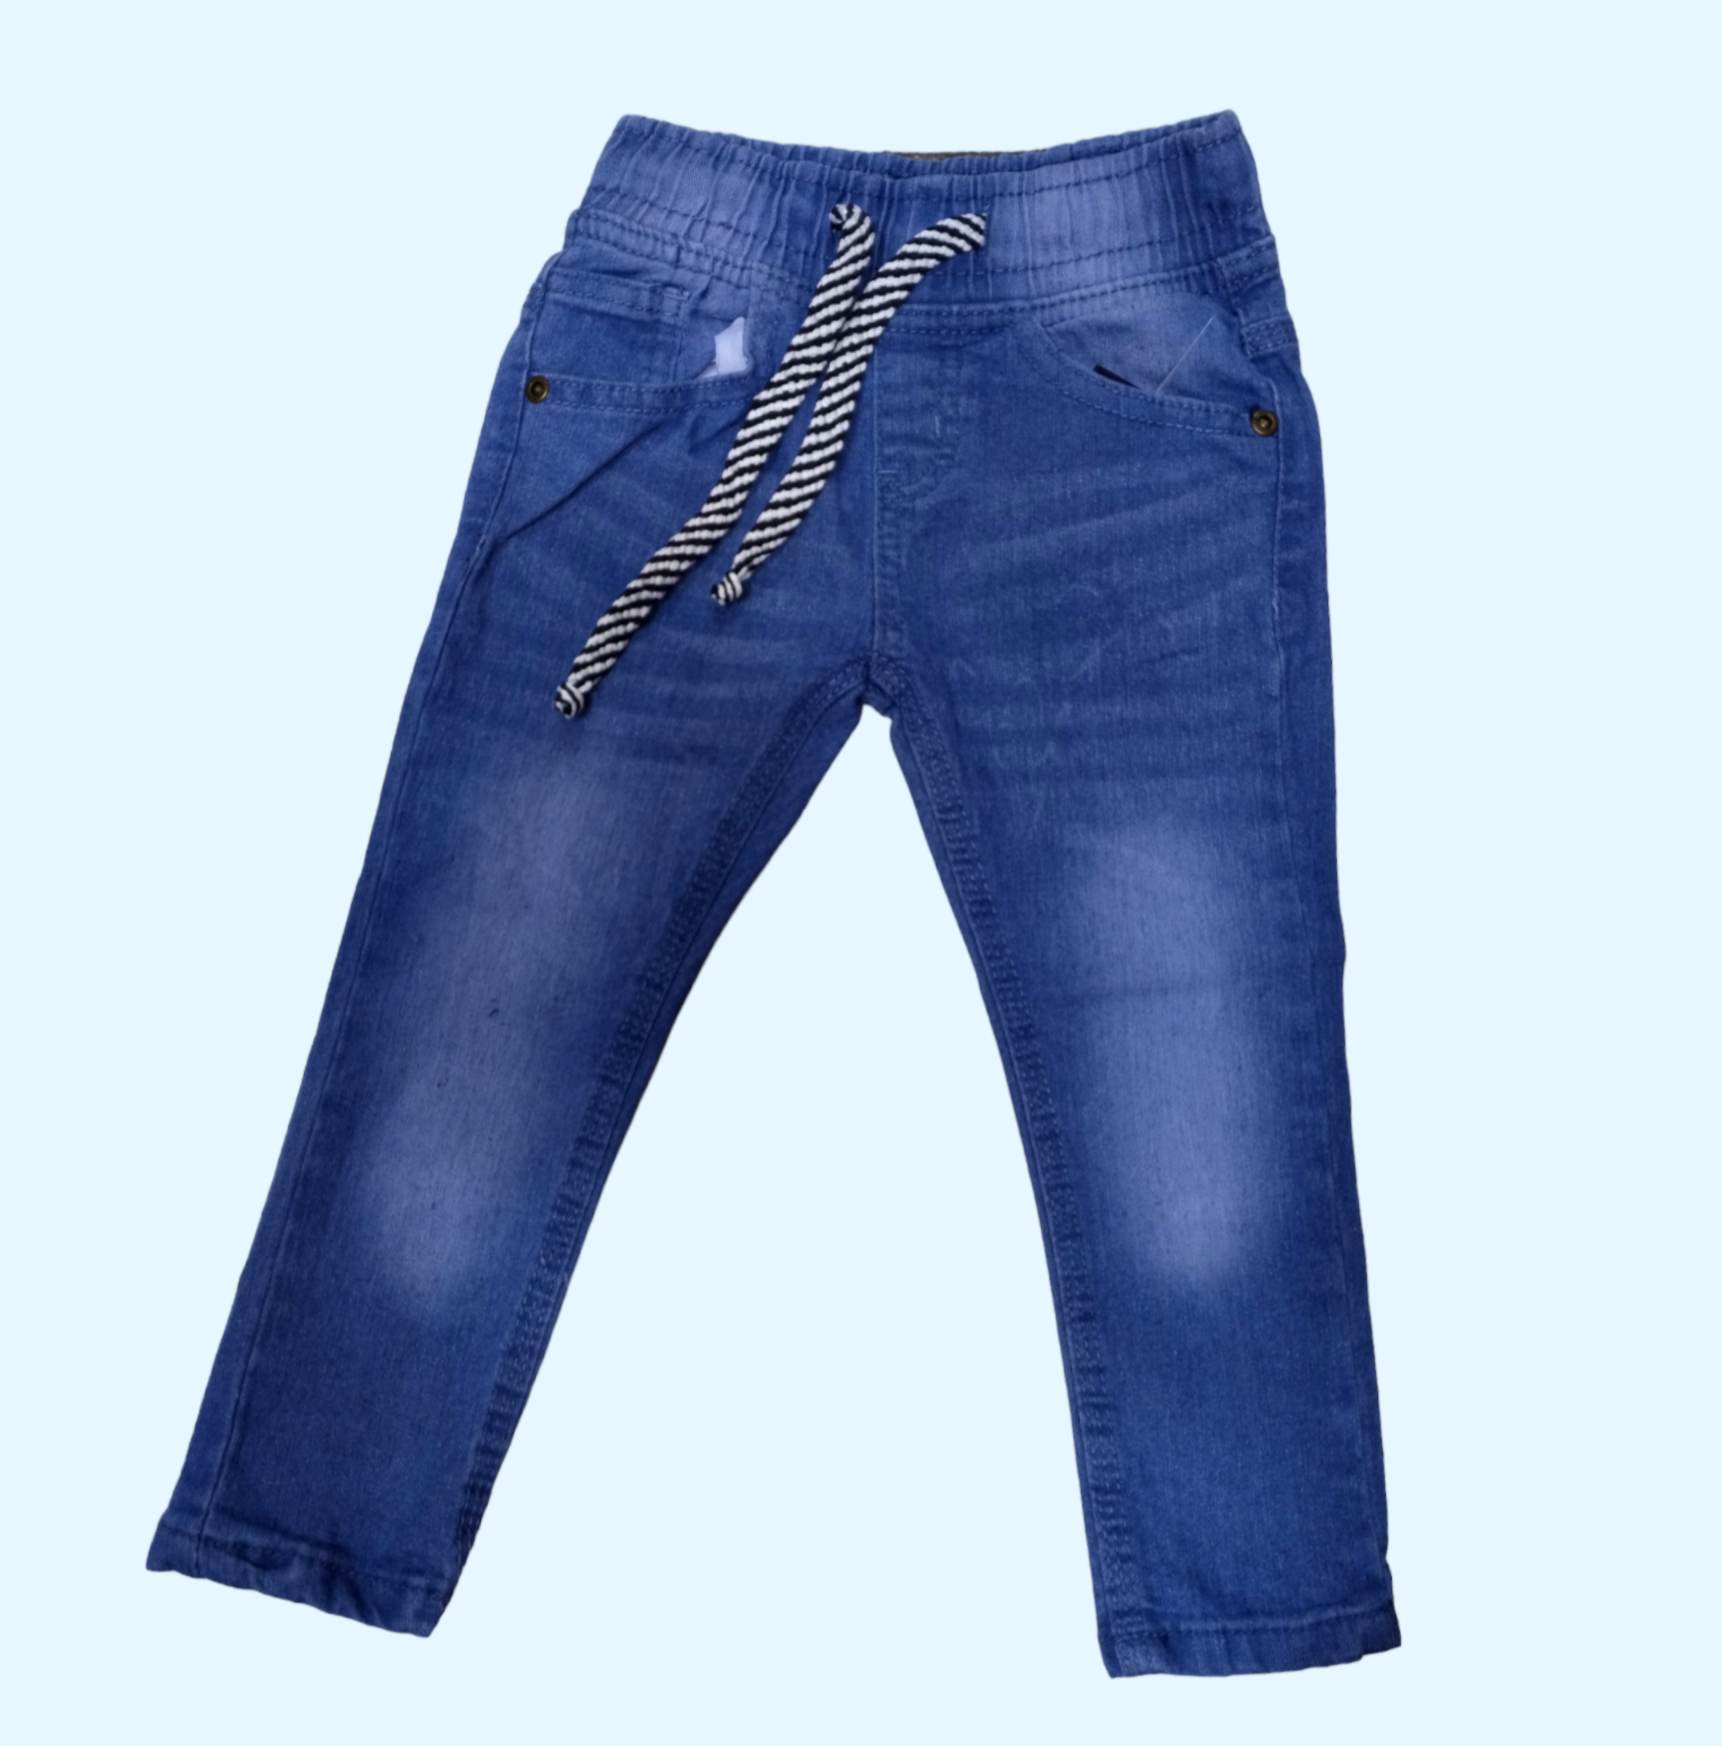 1 Pc Women autumn and winter boys jeans 4-13 years old washed kids jeans  Korean | eBay